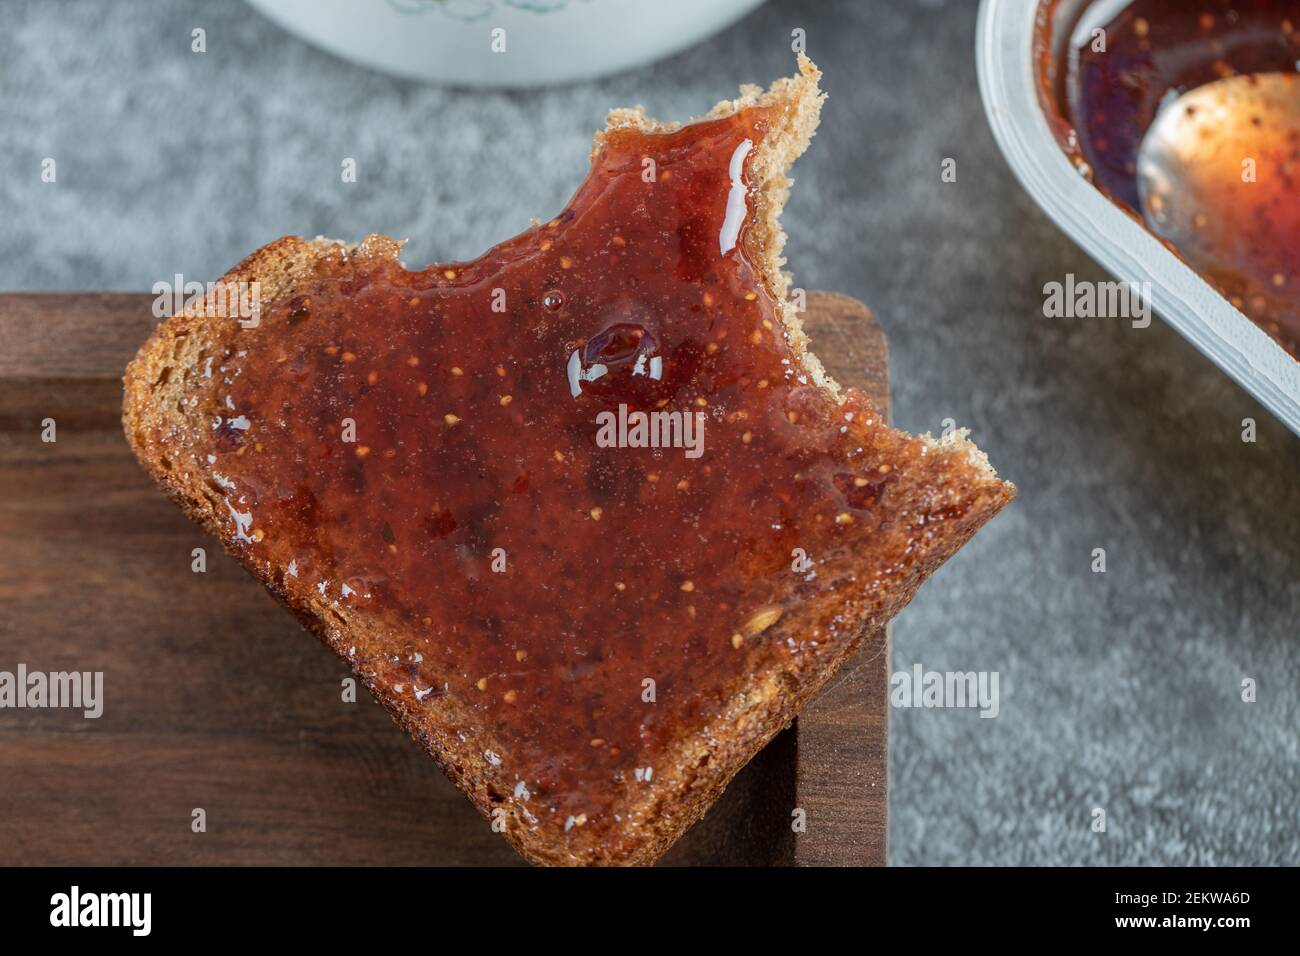 Bit slice of brown bread with strawberry jam Stock Photo